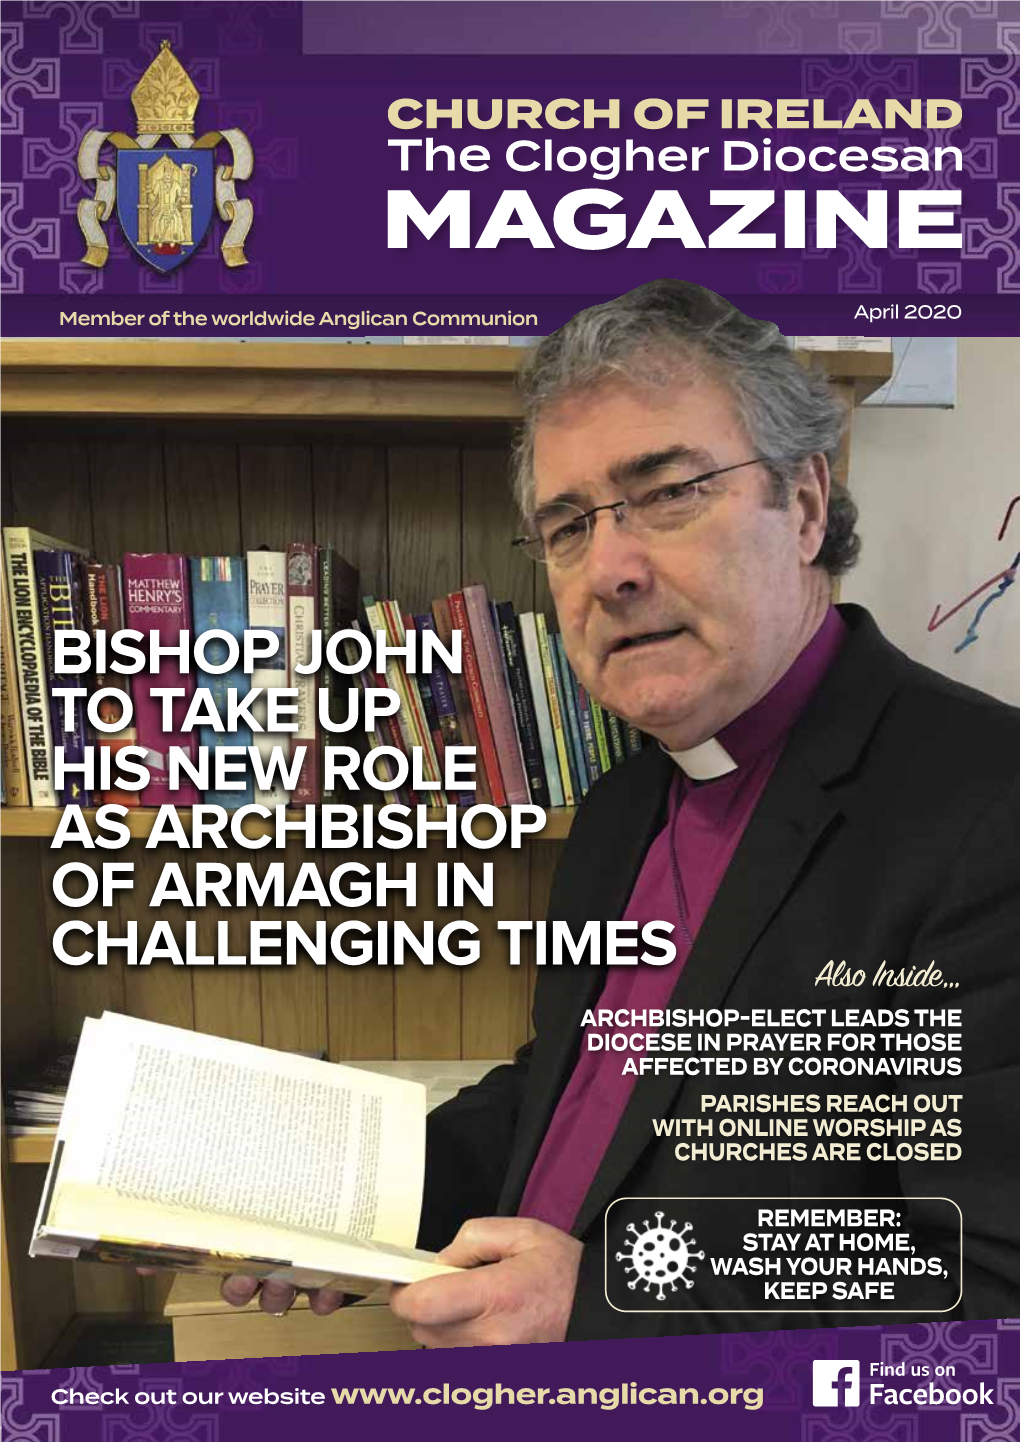 Bishop John to Take up His New Role As Archbishop Of